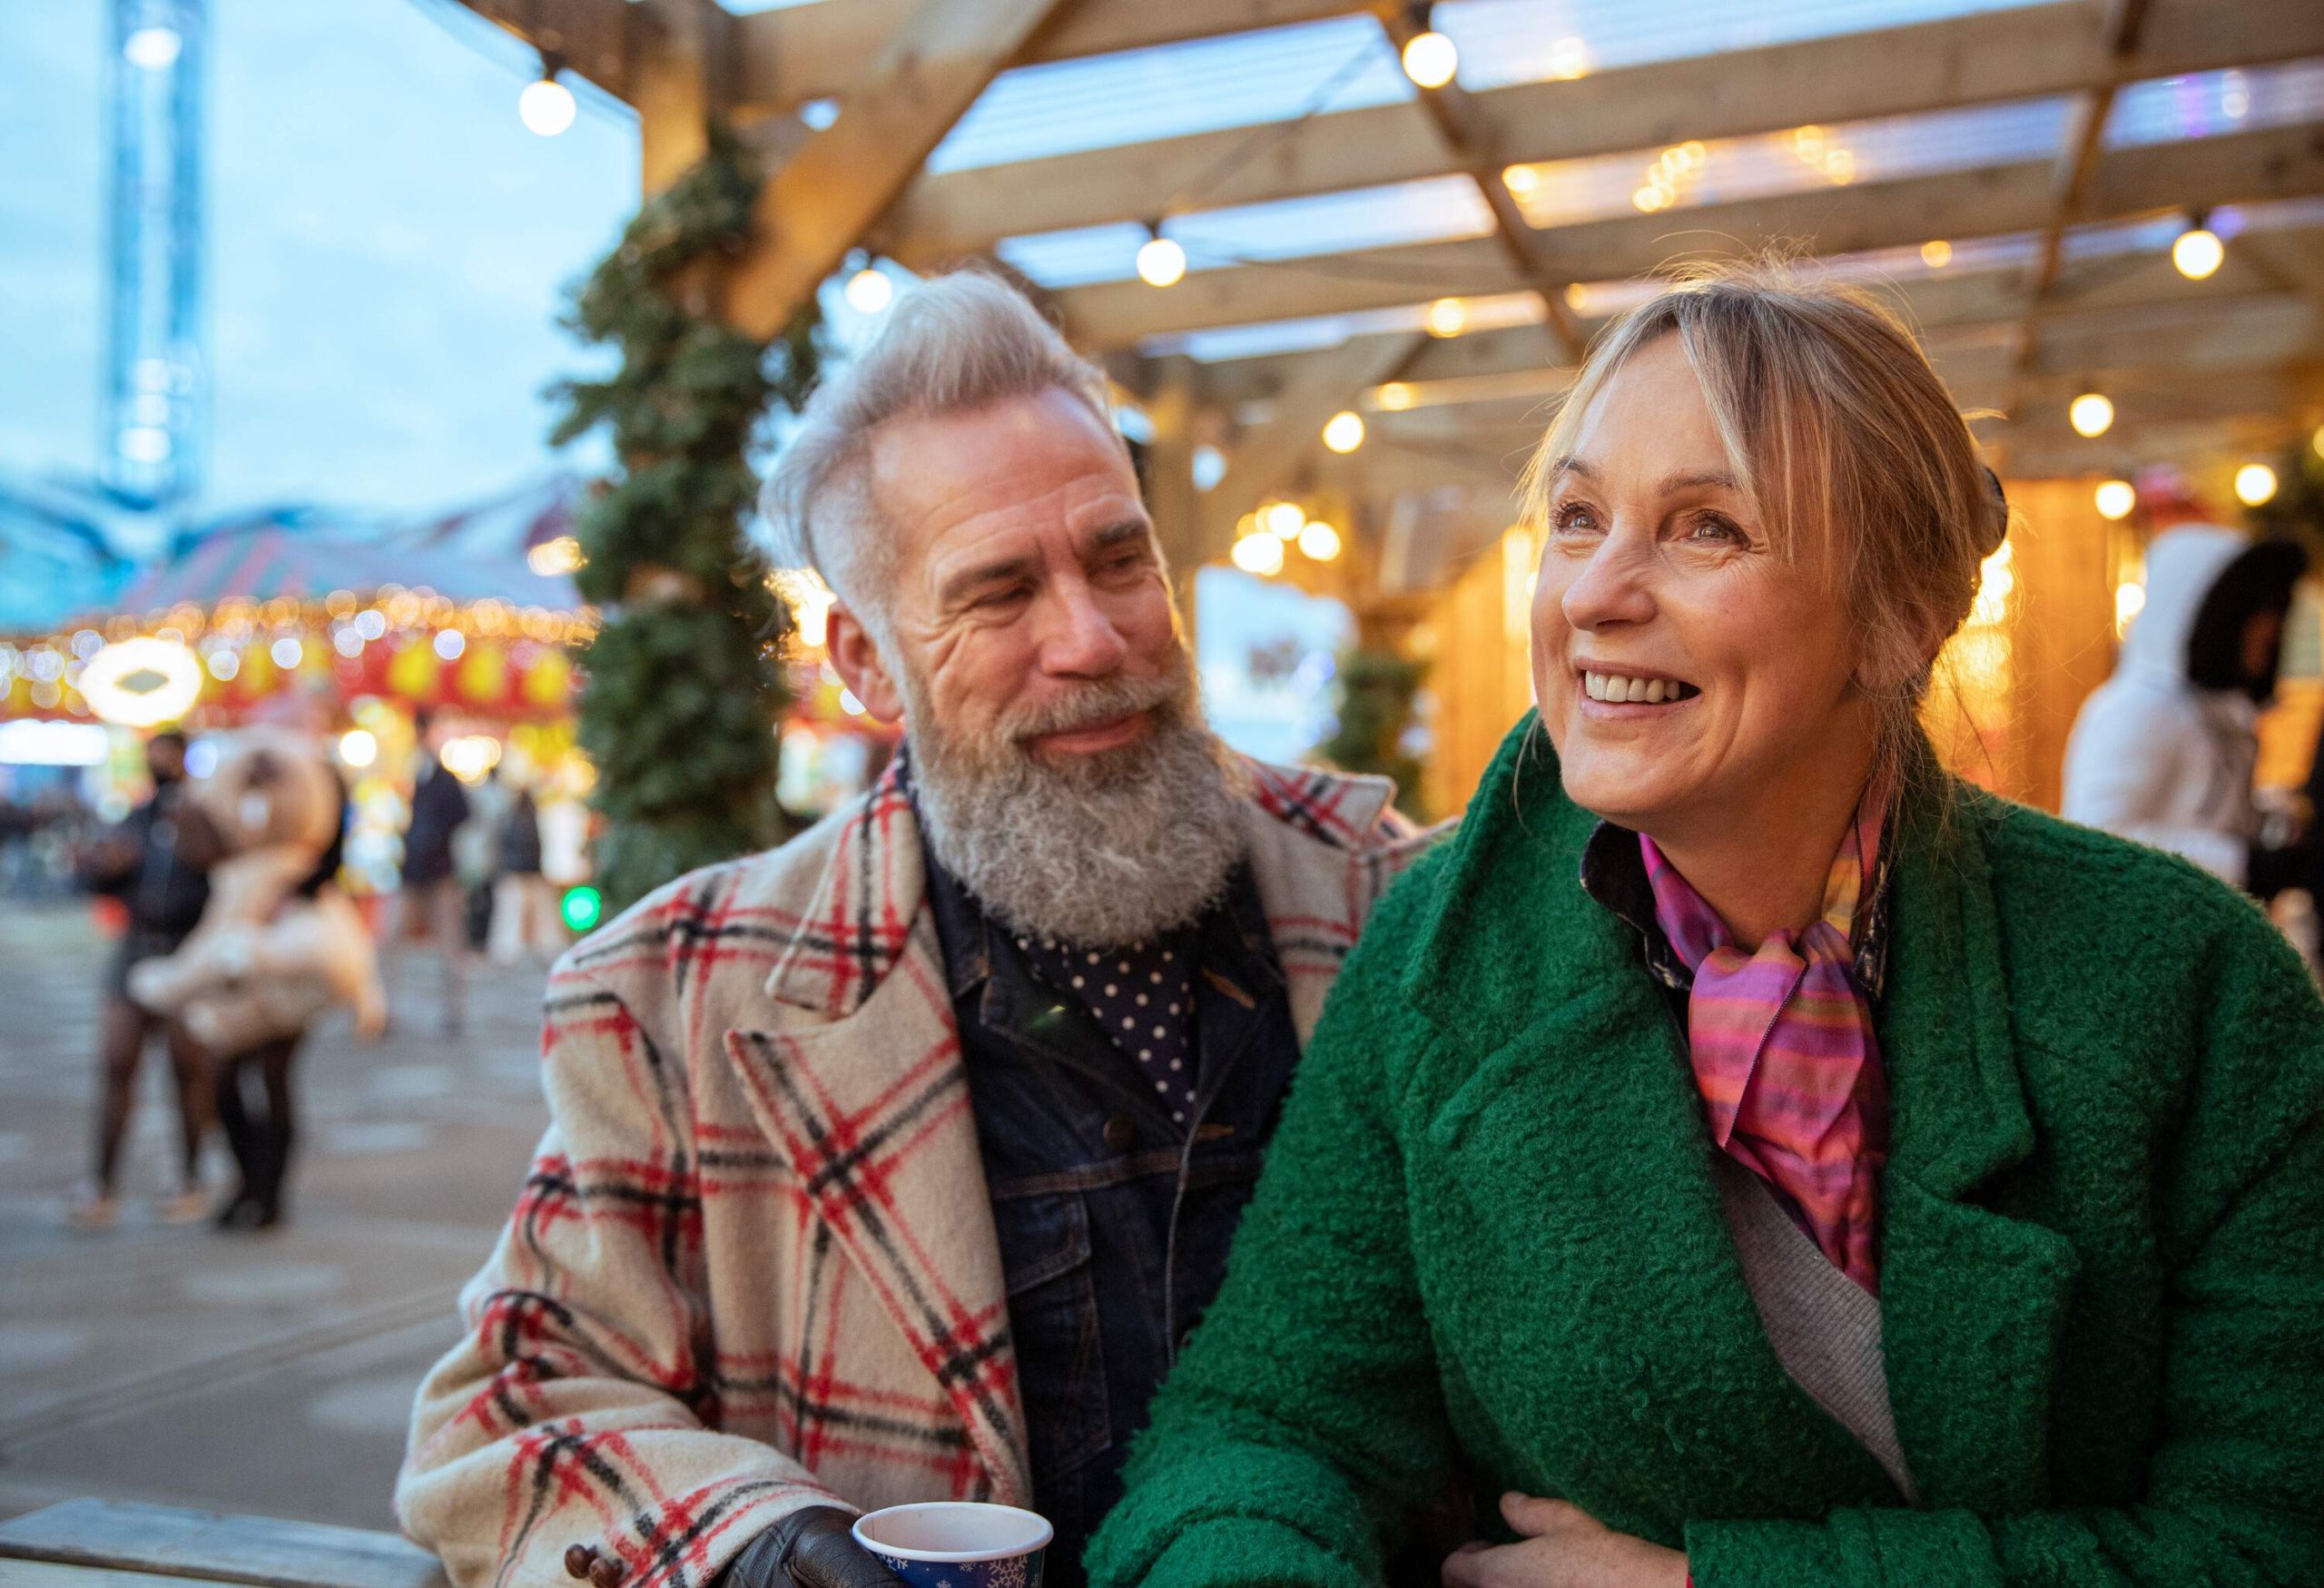 A happy senior couple enjoy drinks at an open air restaurant while at a winter street festival.